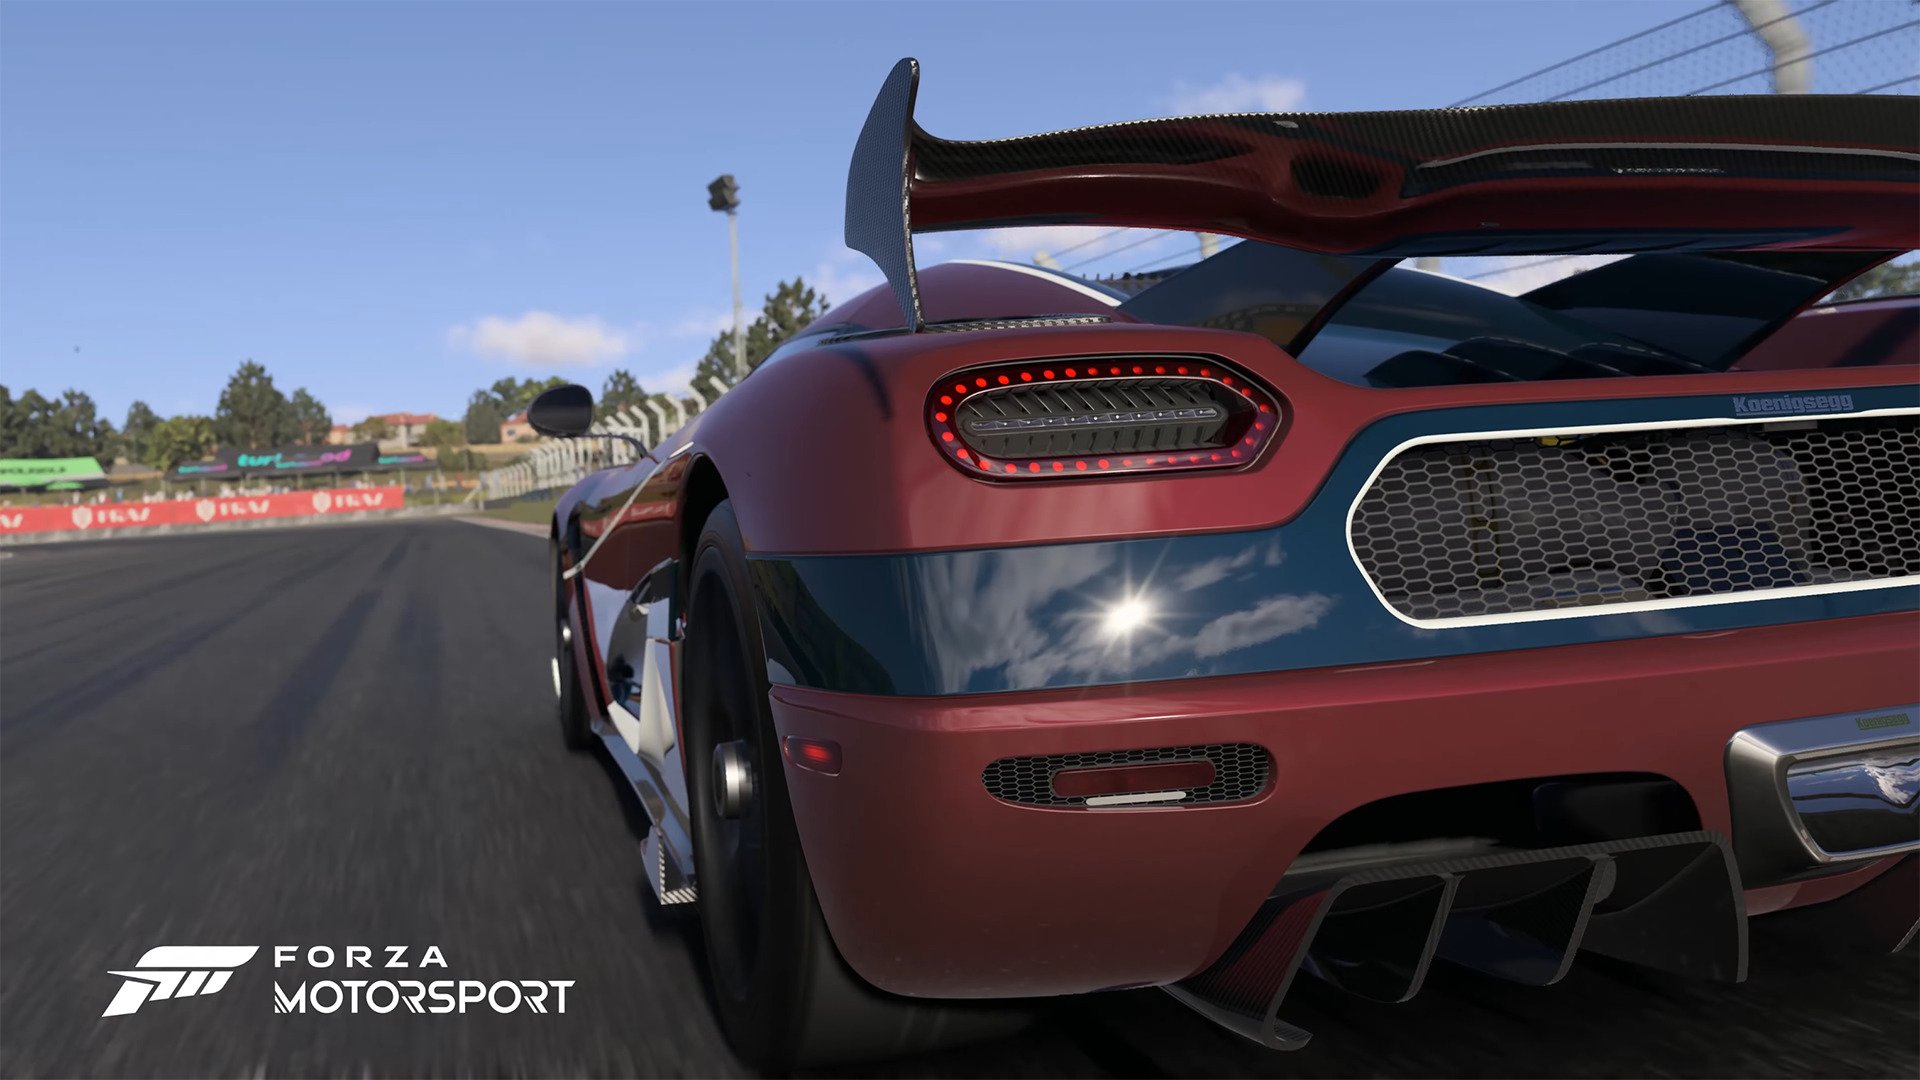 Forza Motorsport Single-Player Mode Revealed: Car Leveling, Car Points,  Online Saves, & More – GTPlanet